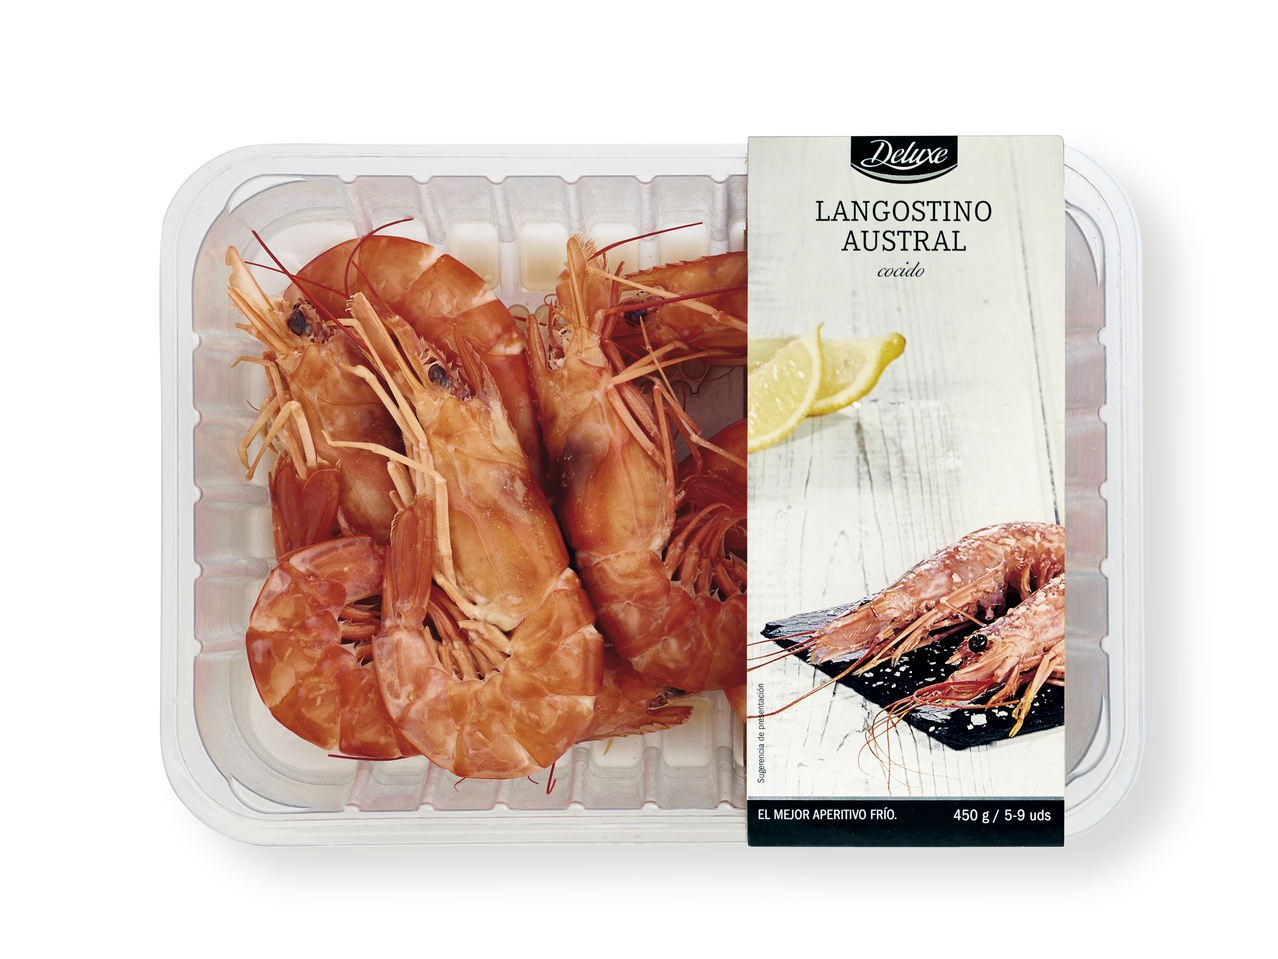 "Deluxe" Langostino austral cocido